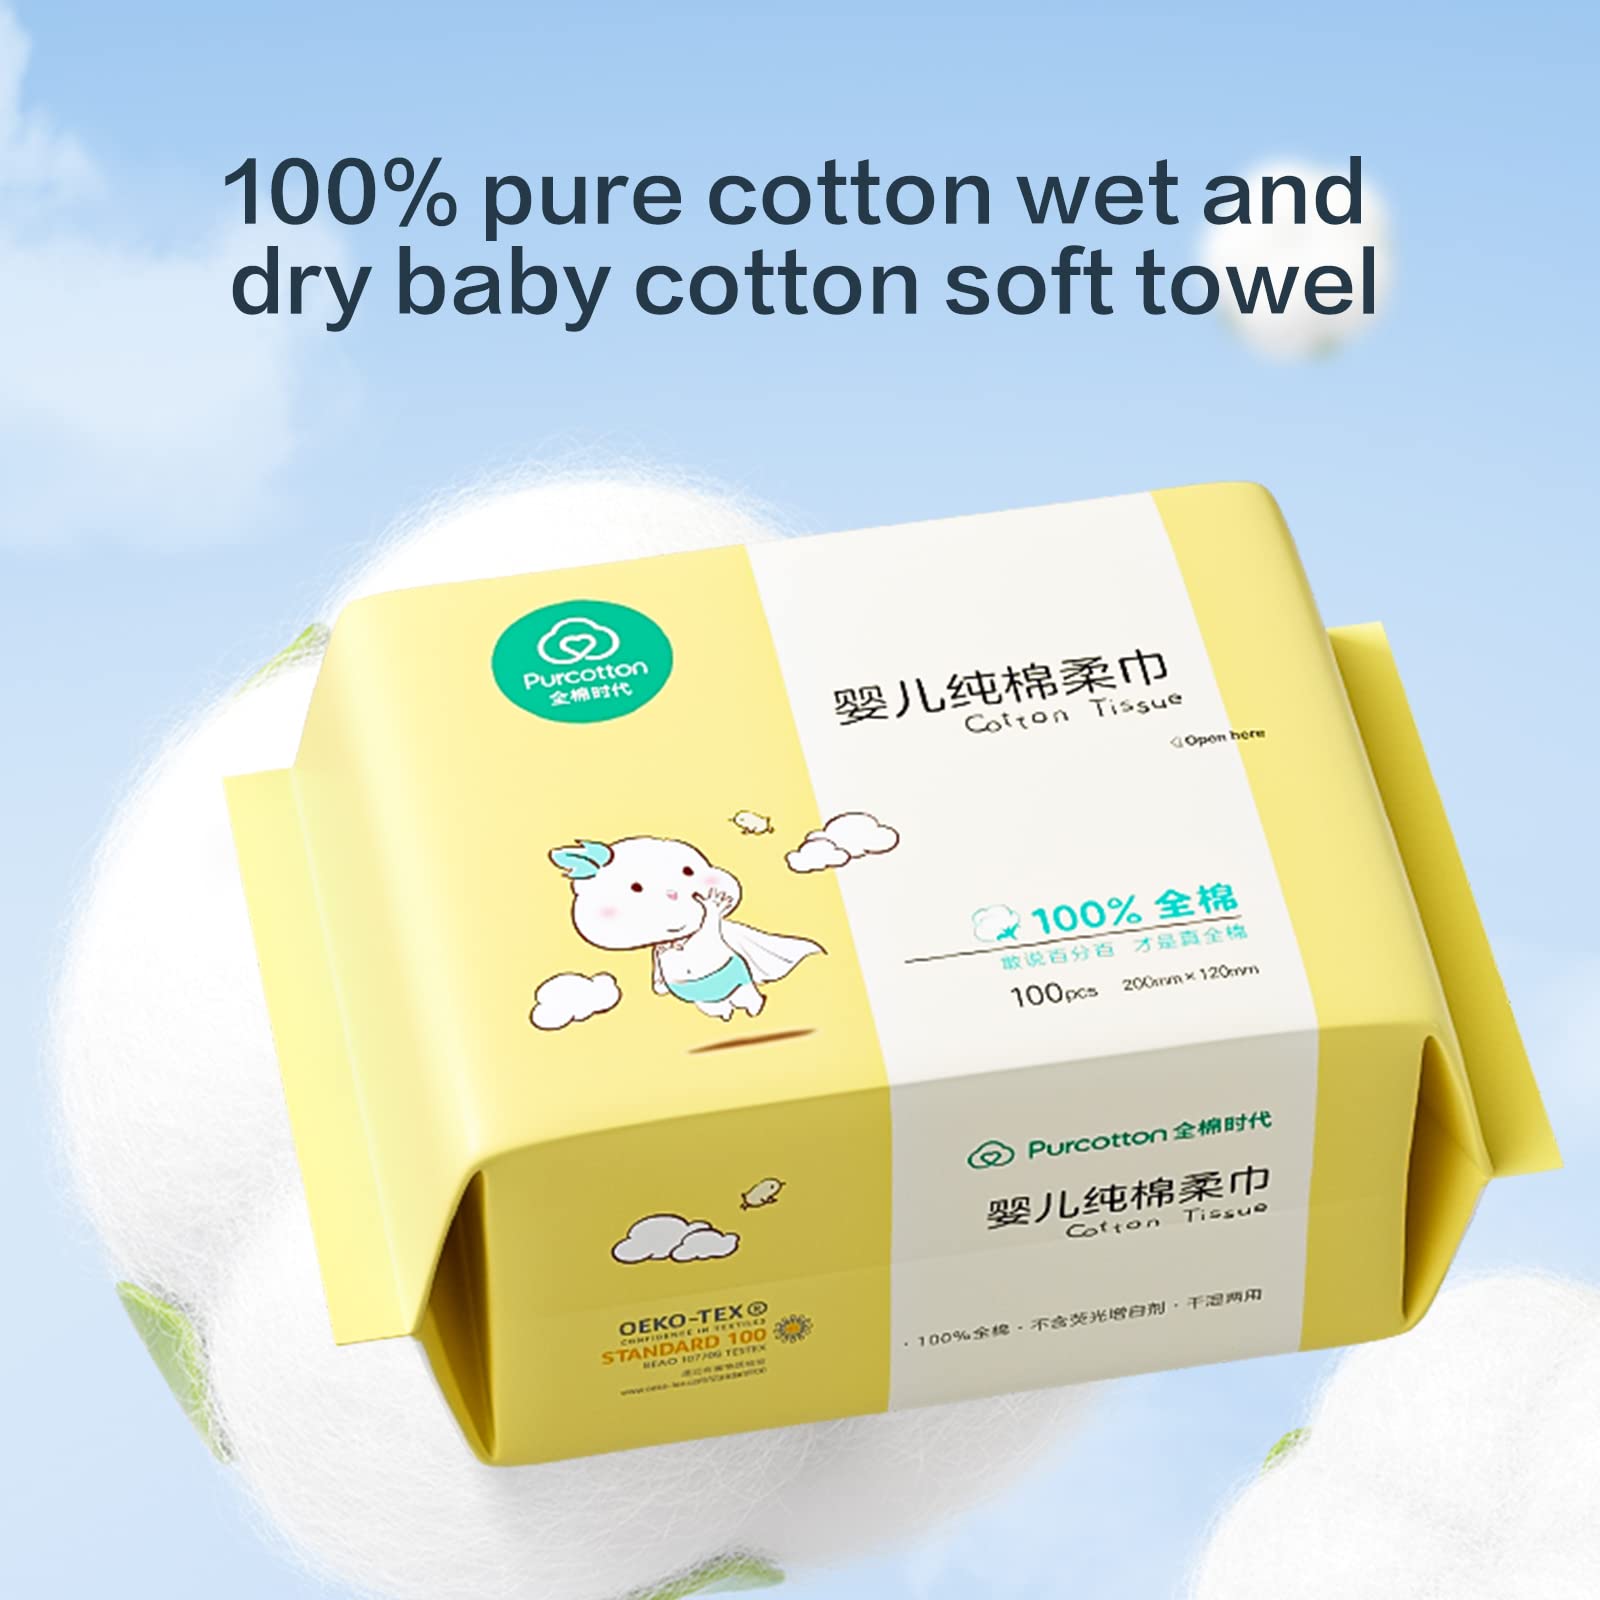 Purcotton Baby Cotton Tissue Ultra Soft 100% Pure Cotton Baby Dry Wipe,Wet and Dry Use,600 Count Unscented Disposable Cotton Facial Tissues & Face Towel For Baby Sensitive Skin